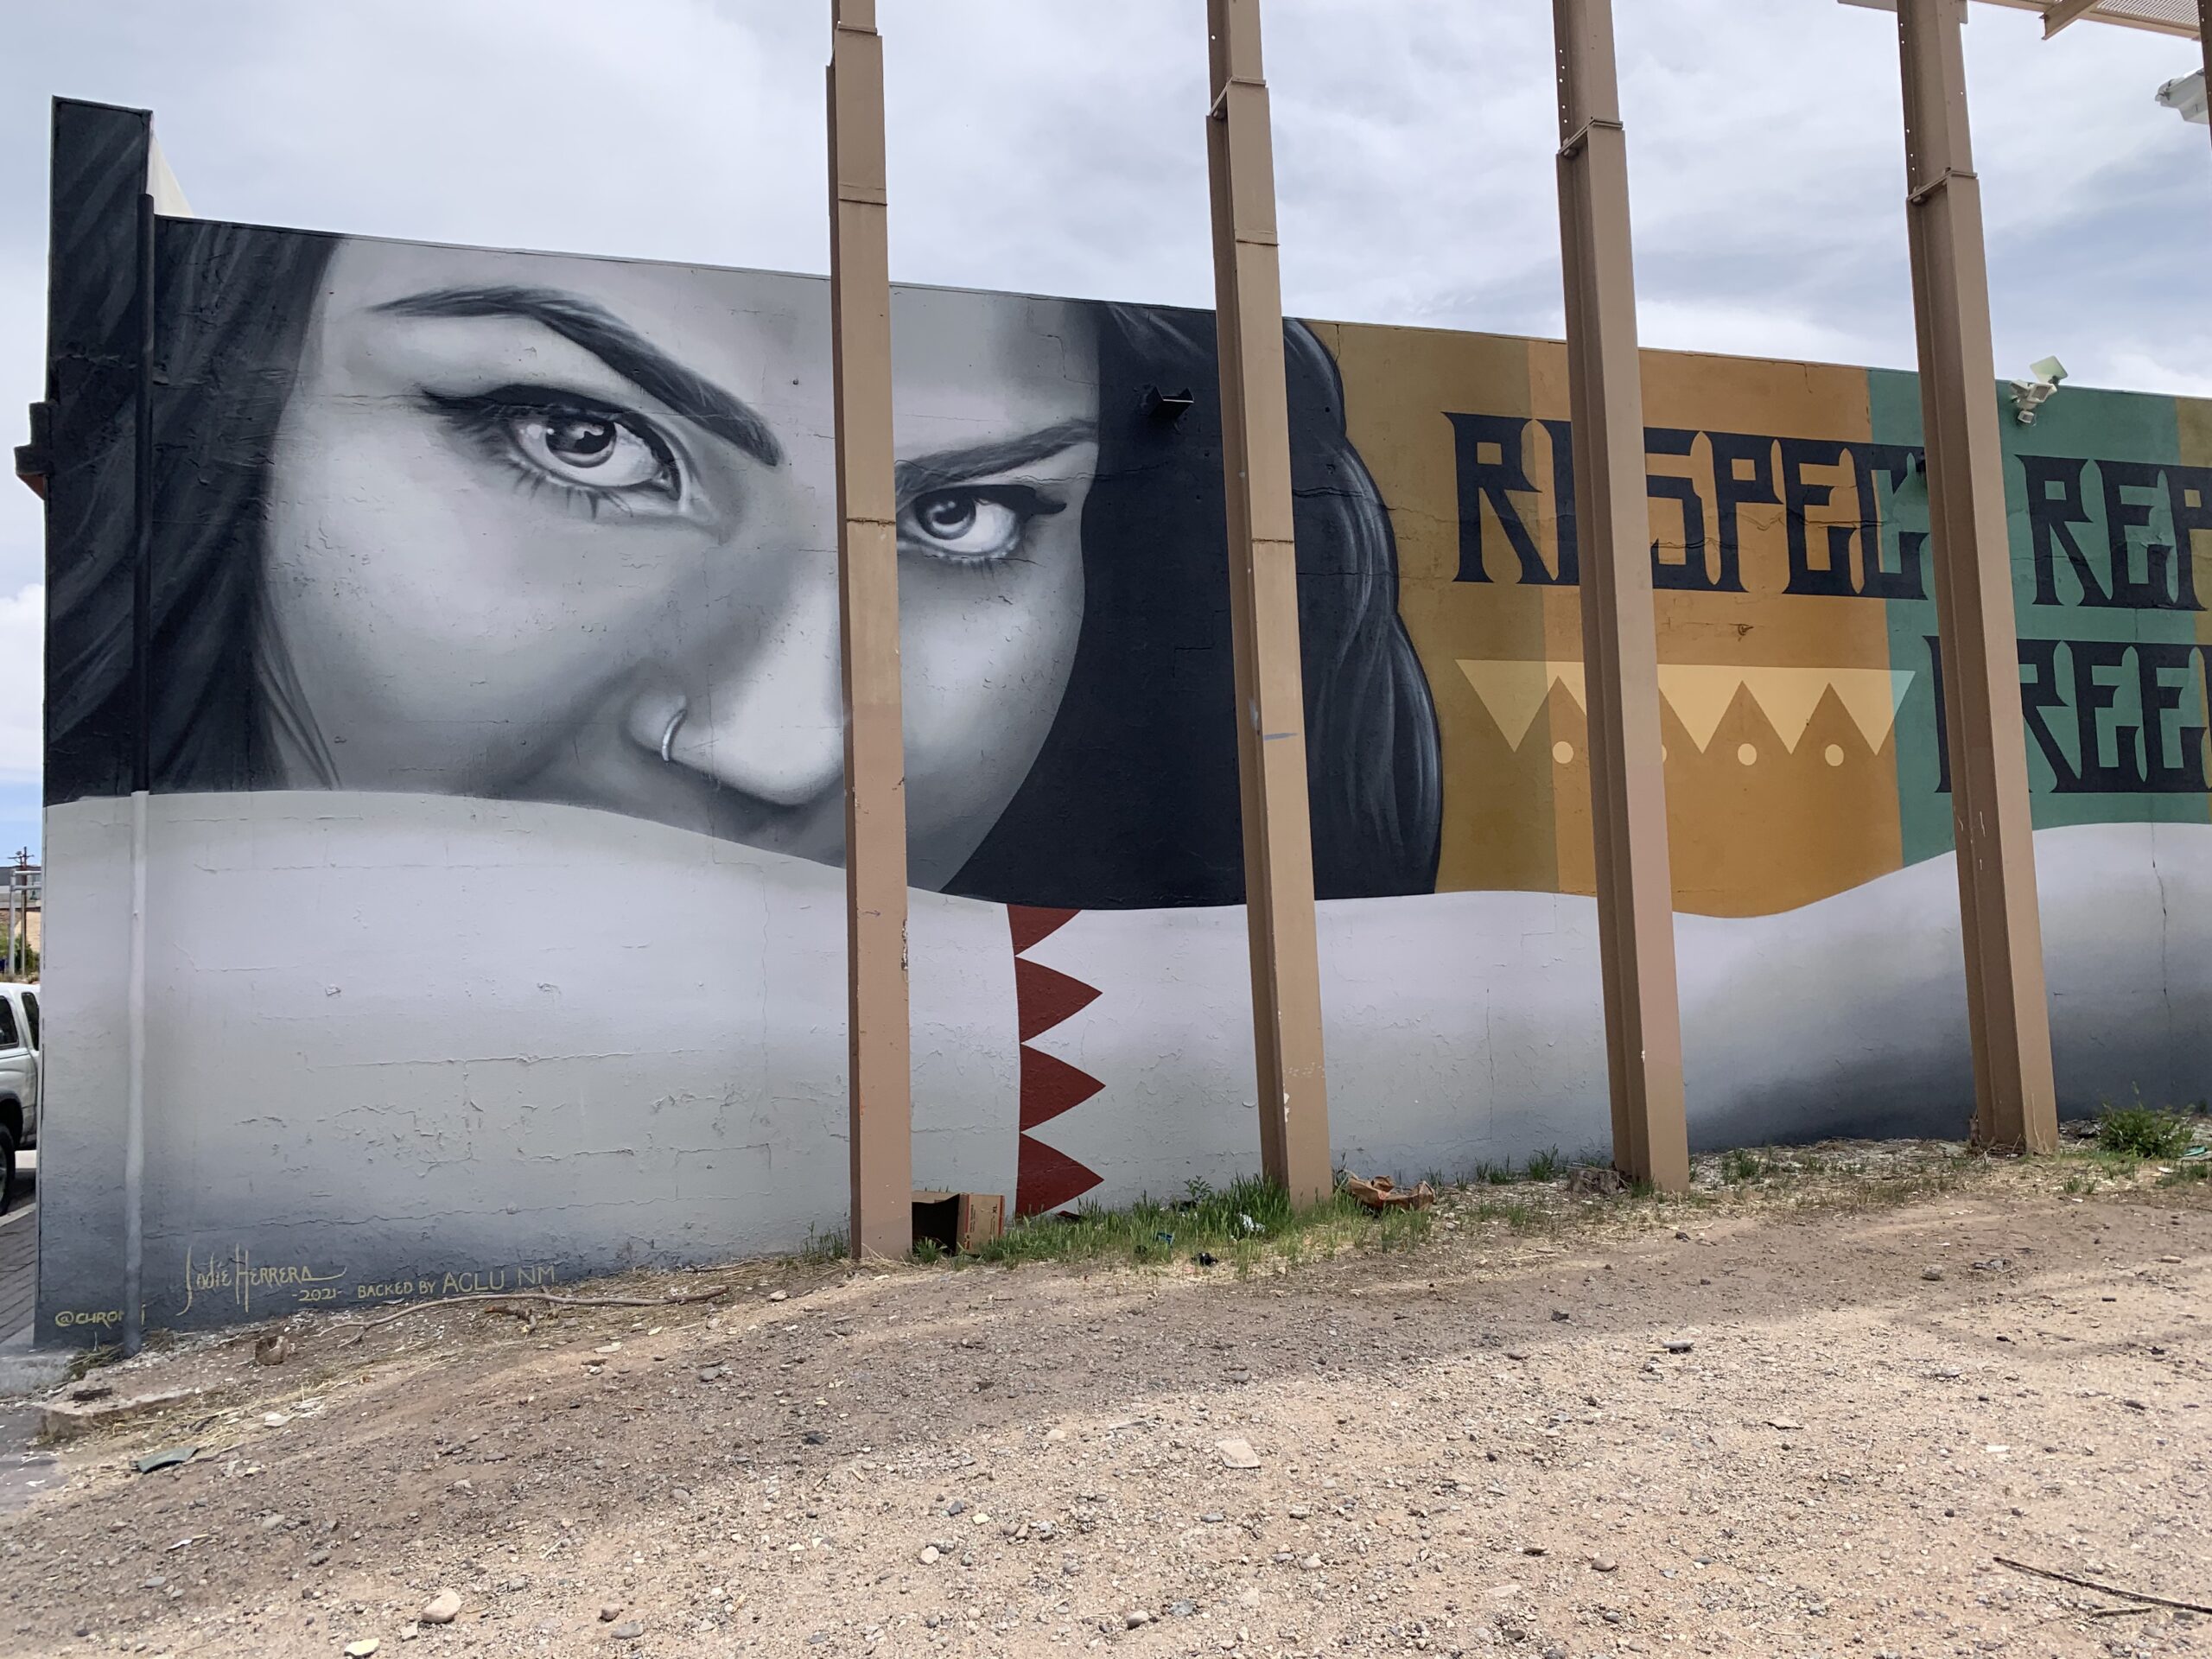 large face of woman with mural title